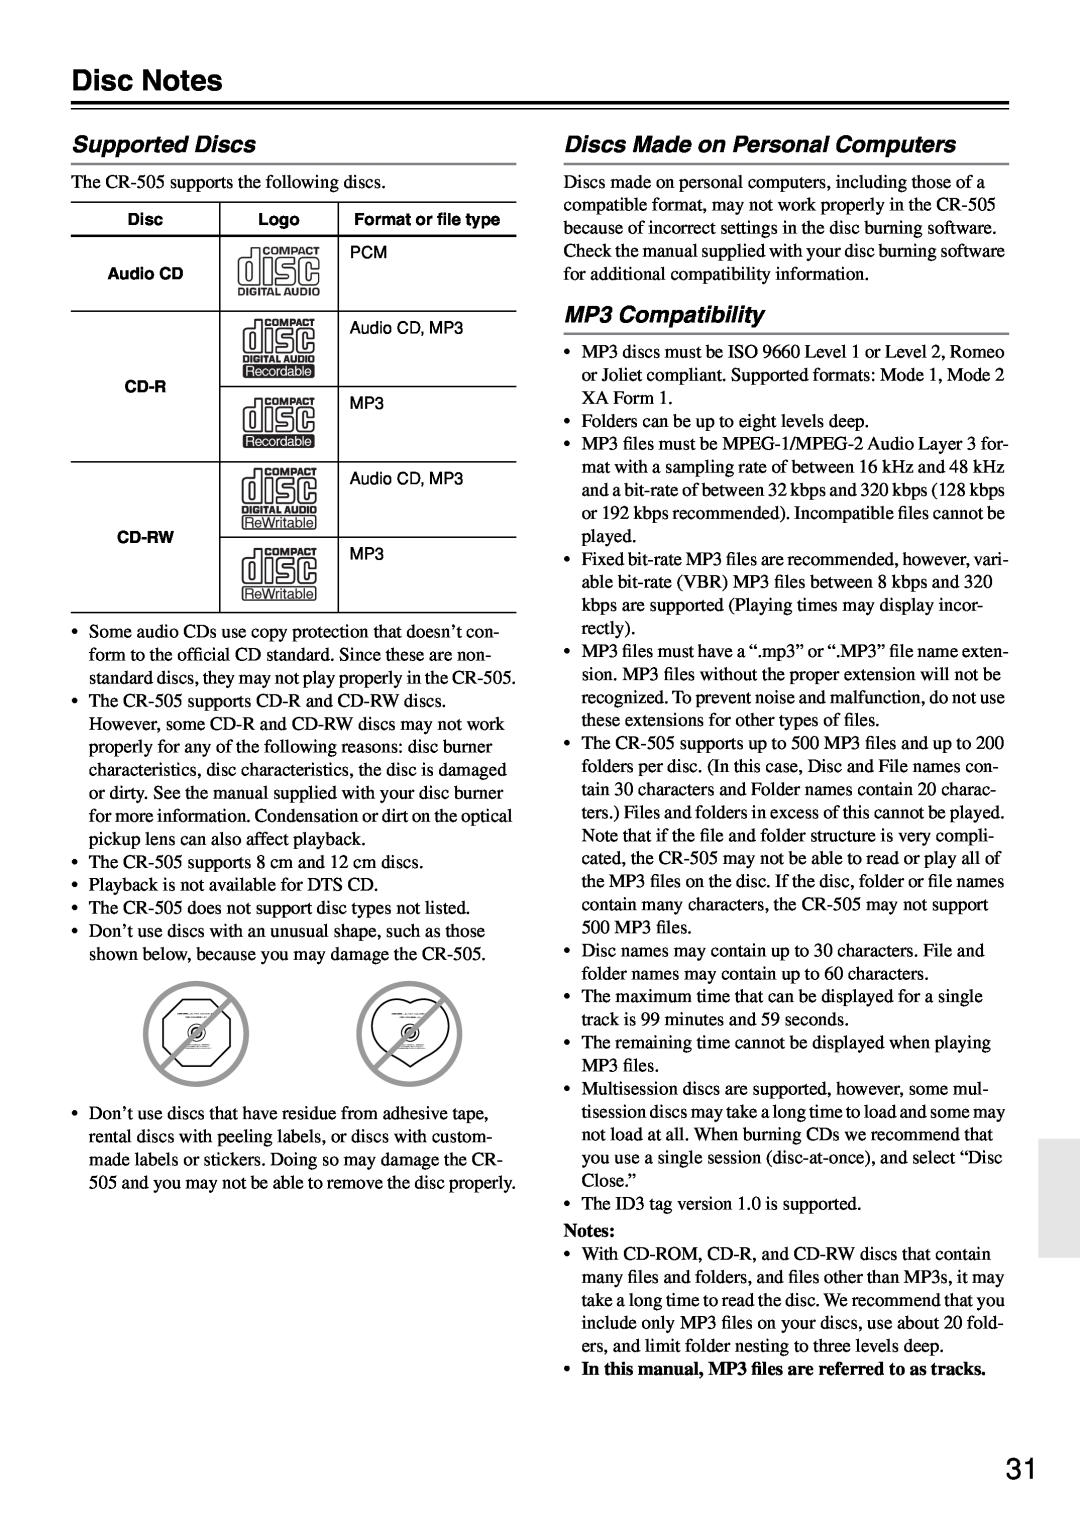 Onkyo CR-505 instruction manual Disc Notes, Supported Discs, Discs Made on Personal Computers, MP3 Compatibility 